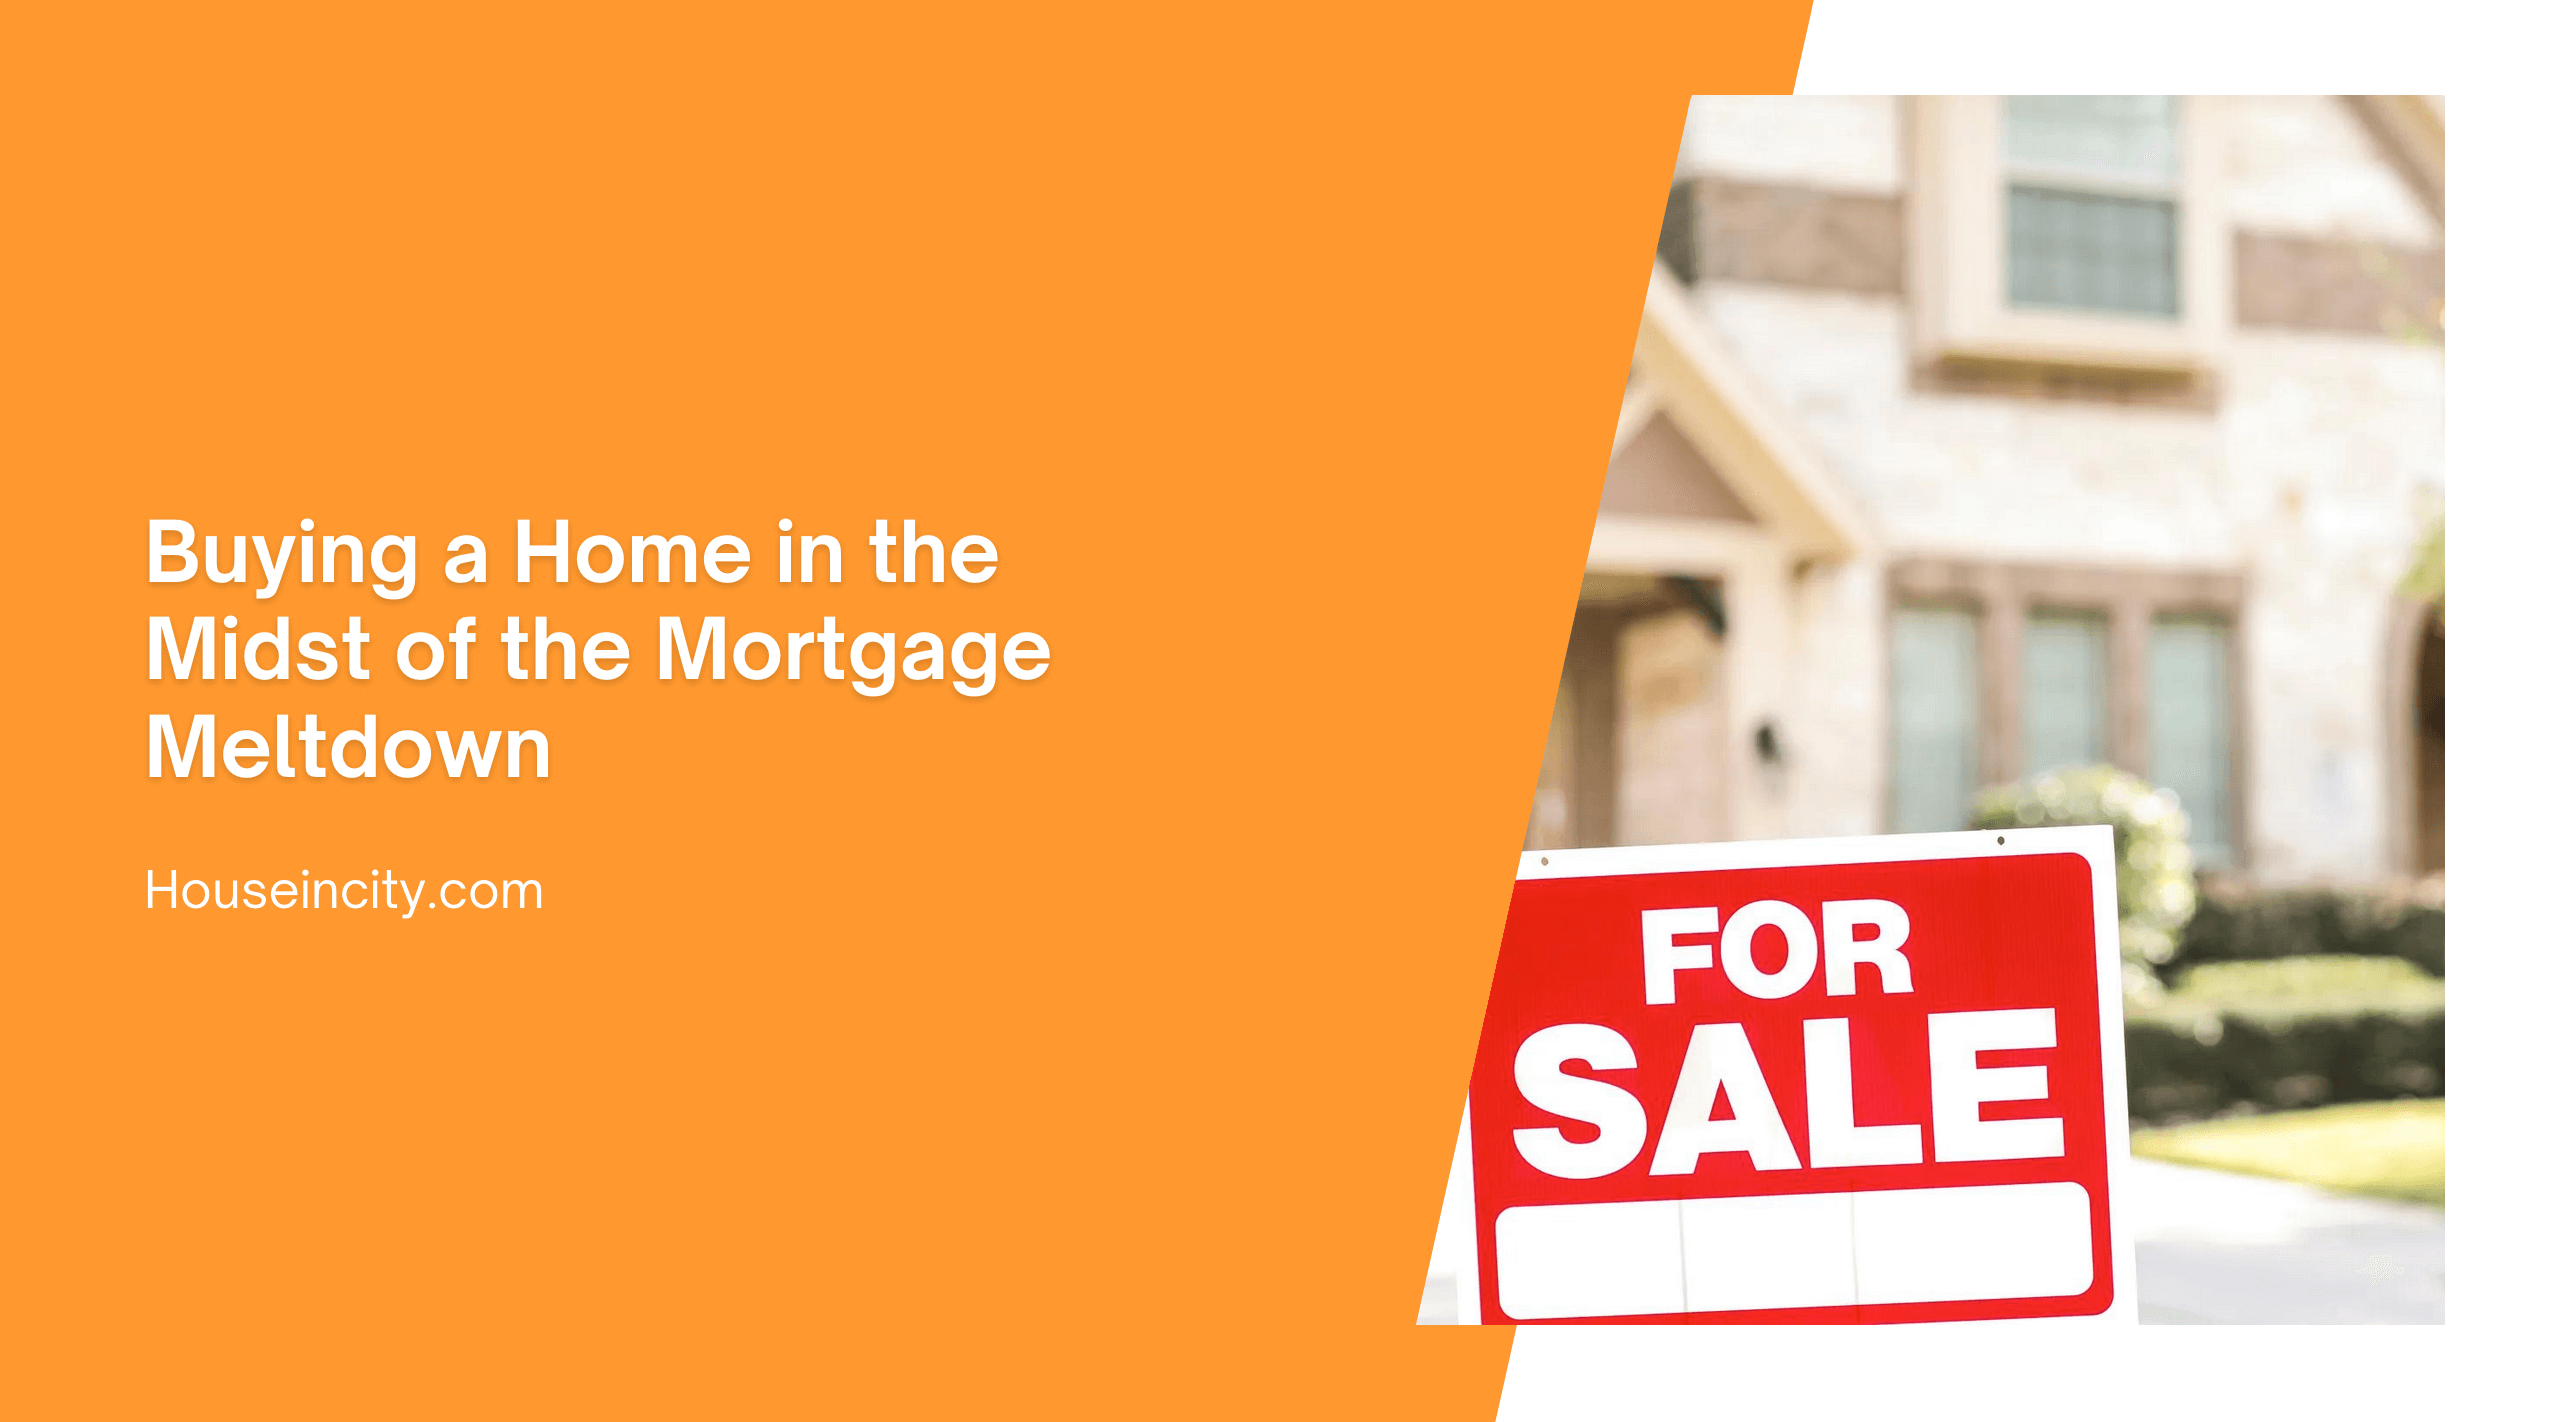 Buying a Home in the Midst of the Mortgage Meltdown